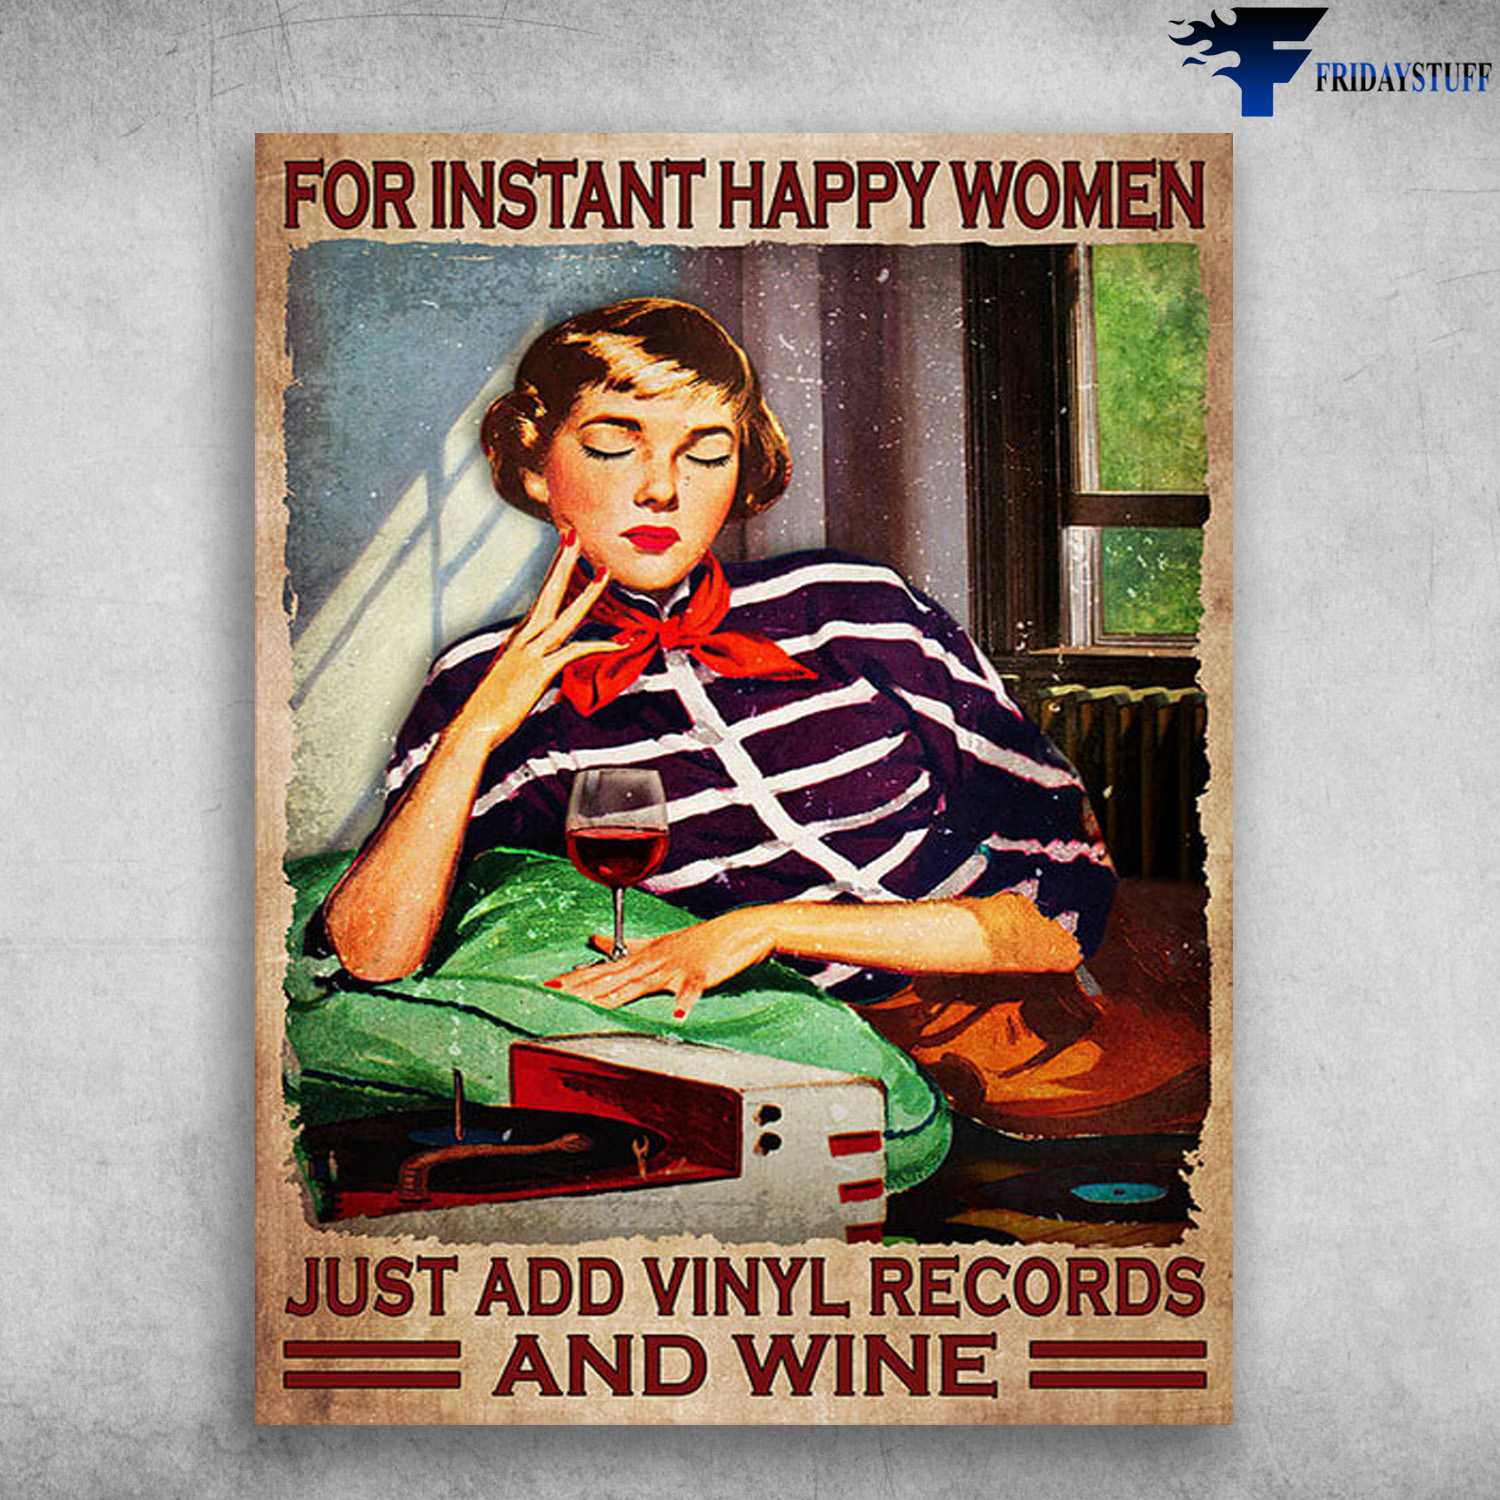 Music And Wine, Vinyl Record - For Instant Happy Women, Just Add Vinyl Records And Wine